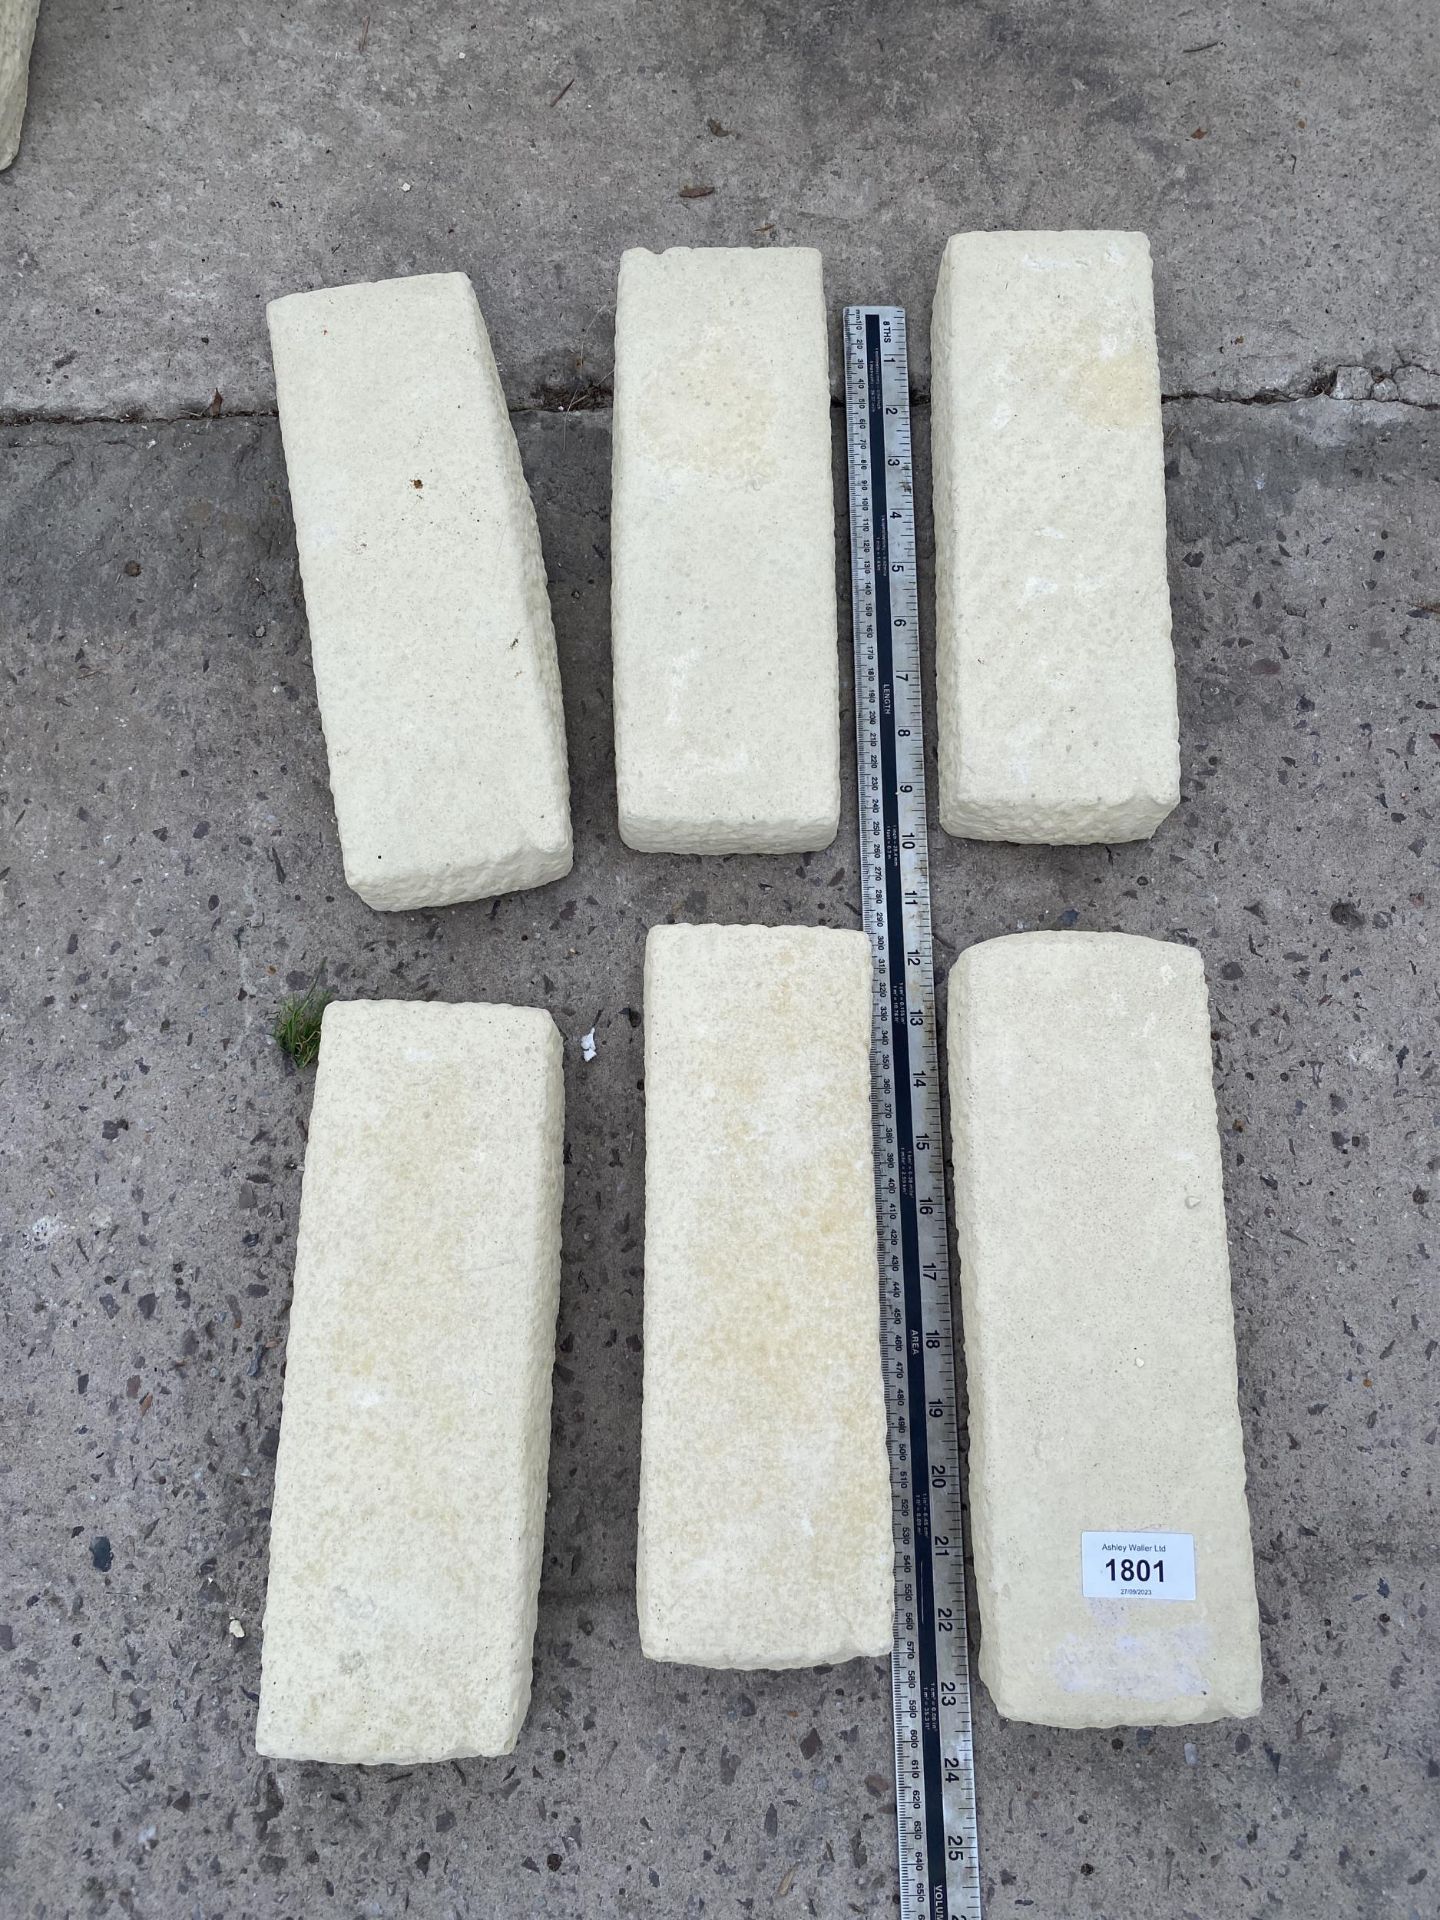 AN AS NEW EX DISPLAY CONCRETE SET OF SIX EDGING BLOCKS *PLEASE NOTE VAT TO BE PAID ON THIS ITEM*